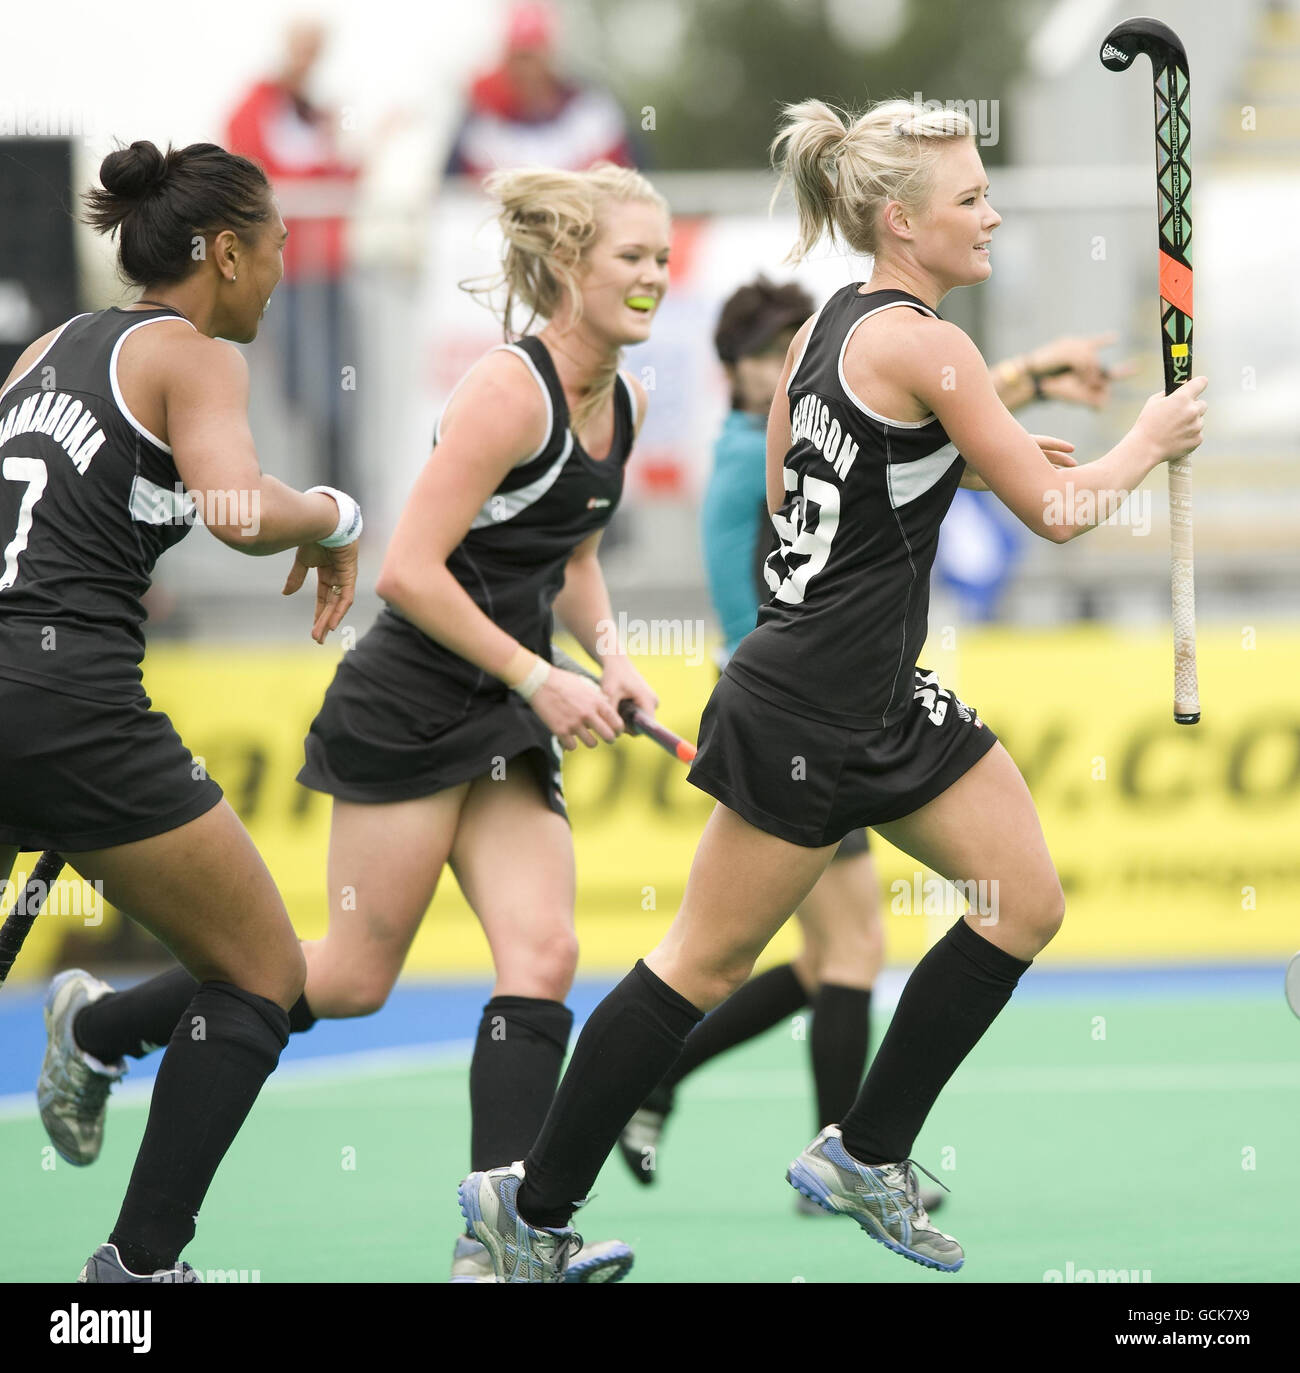 Charlotte Harrison: Beauty, speed and power = perfect field hockey goal!